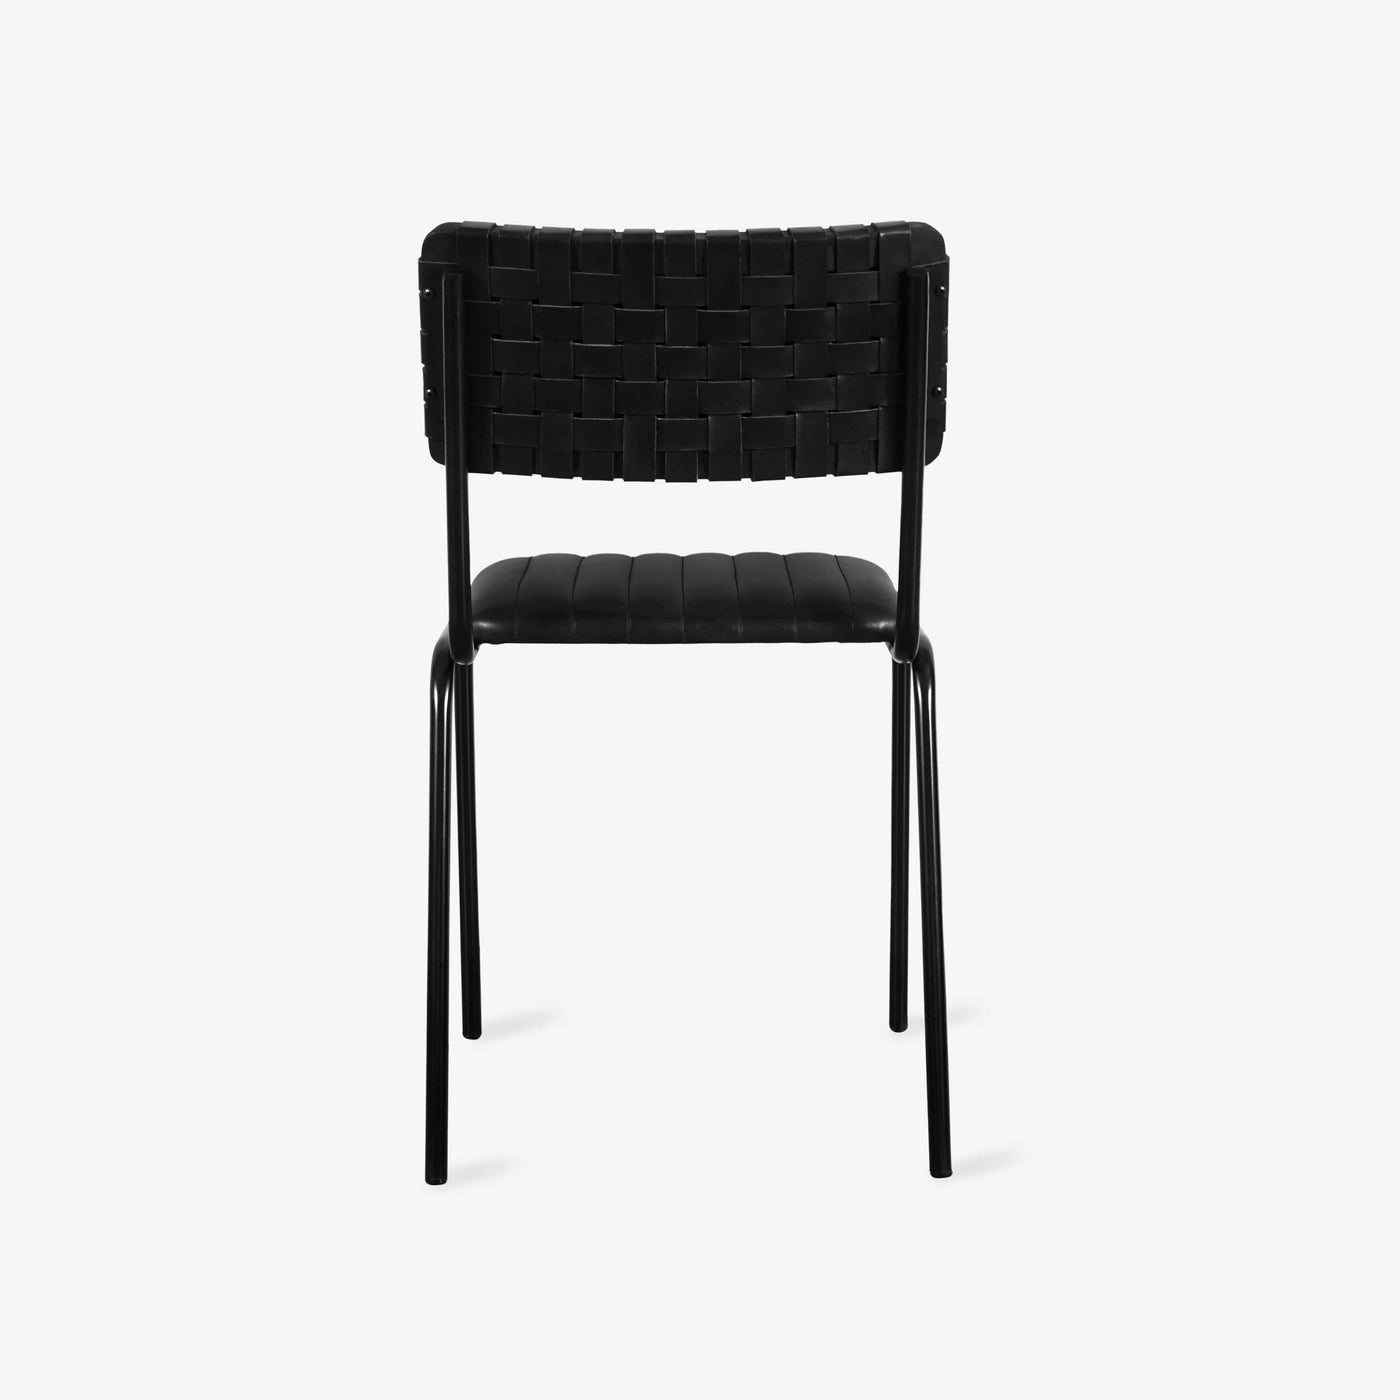 Algar Woven Leather Dining Chair, Black Dining Chairs & Benches sazy.com